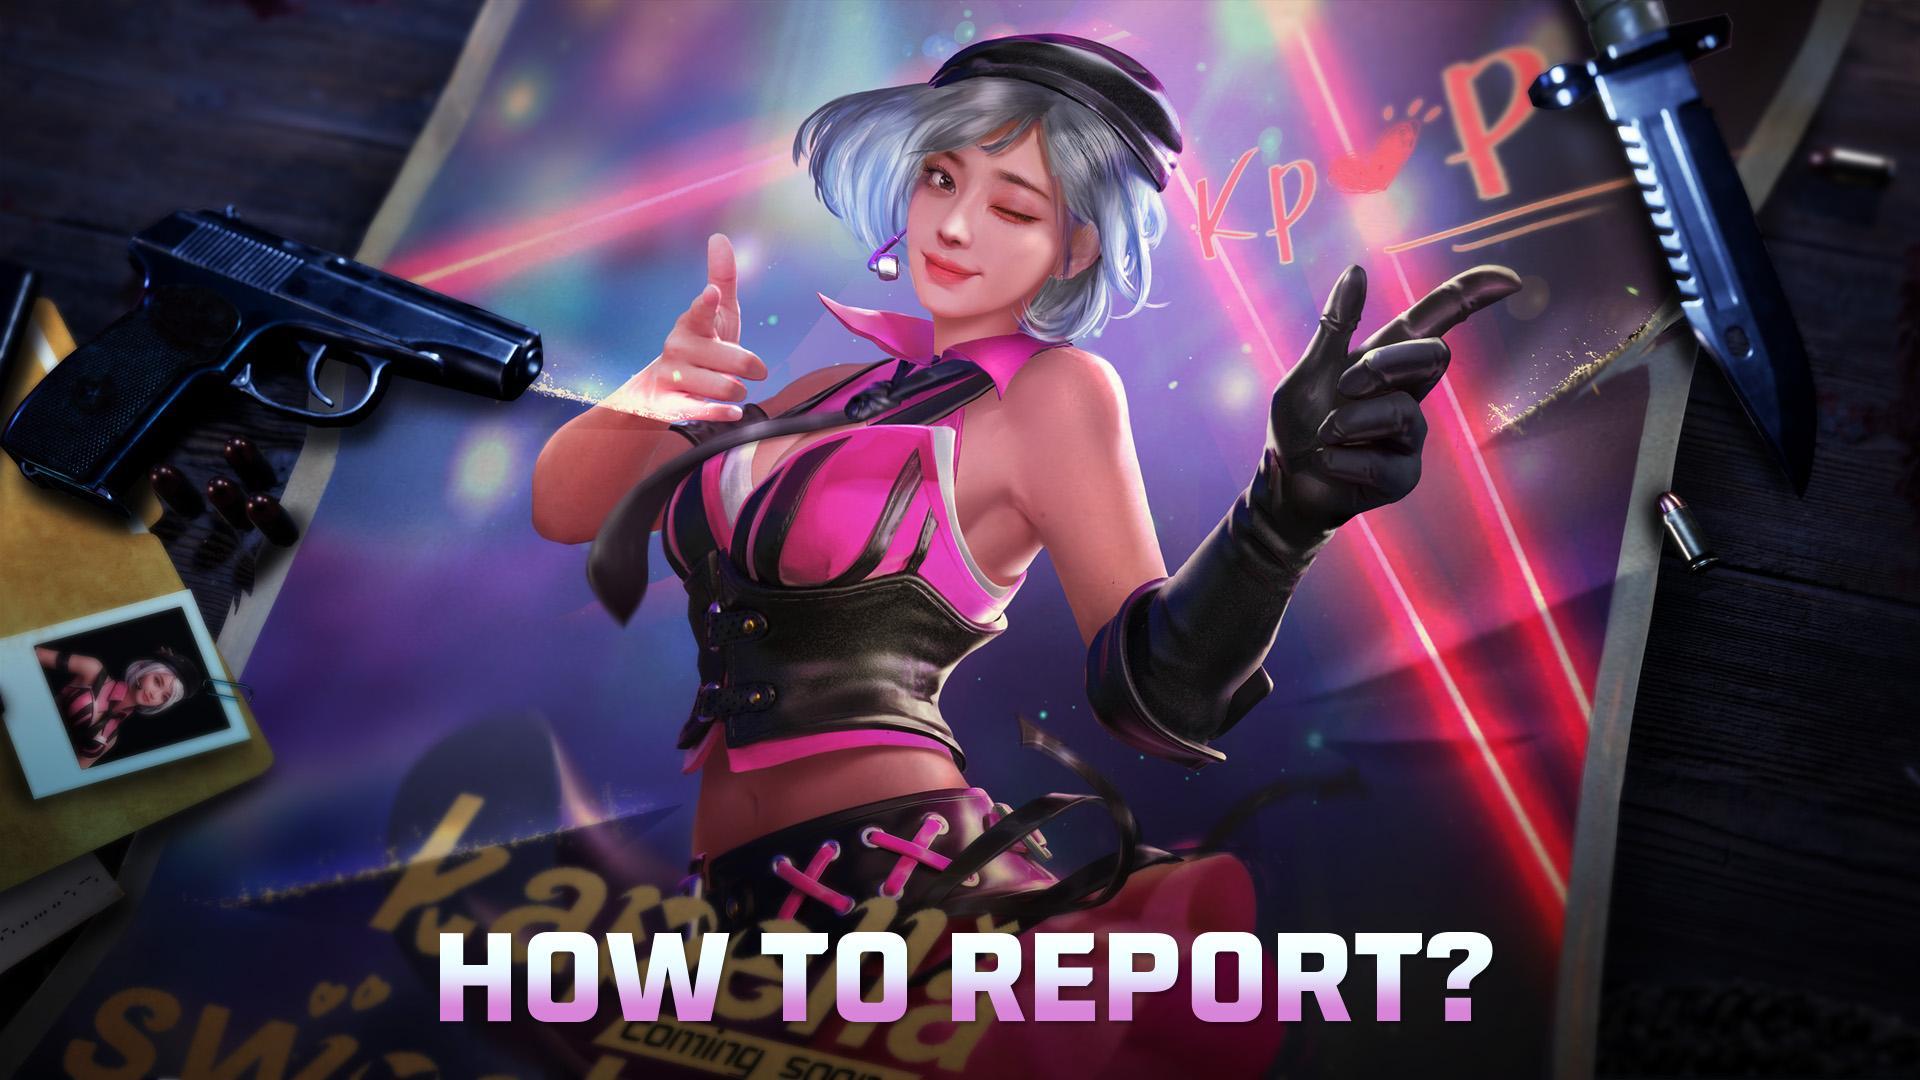 How to Report?